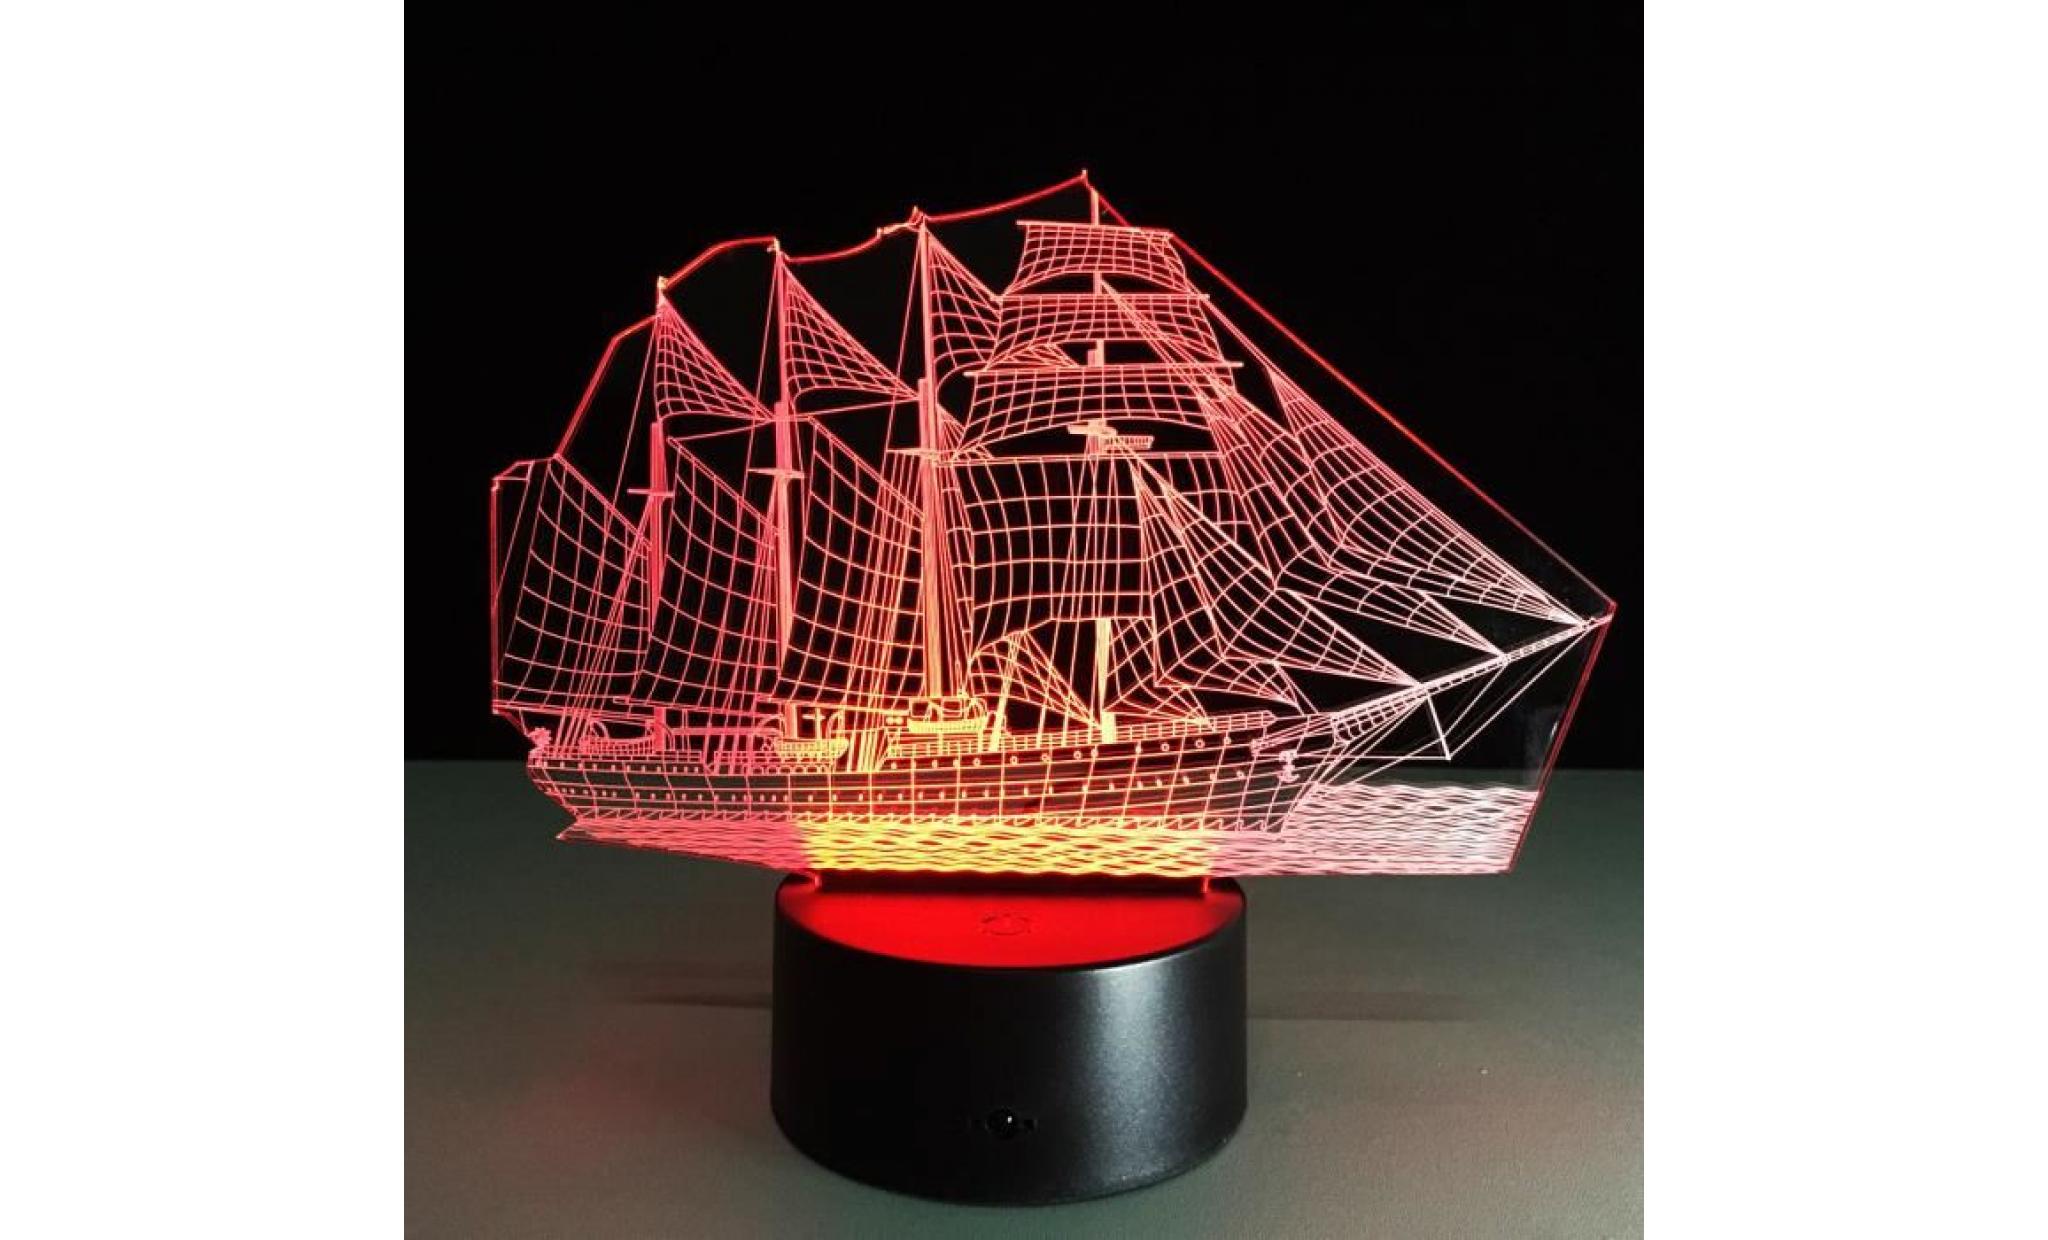 sailboat 3d illusion led night light 7 color touchswitch table desk lamp gift pageare1712 pageare1712 pas cher